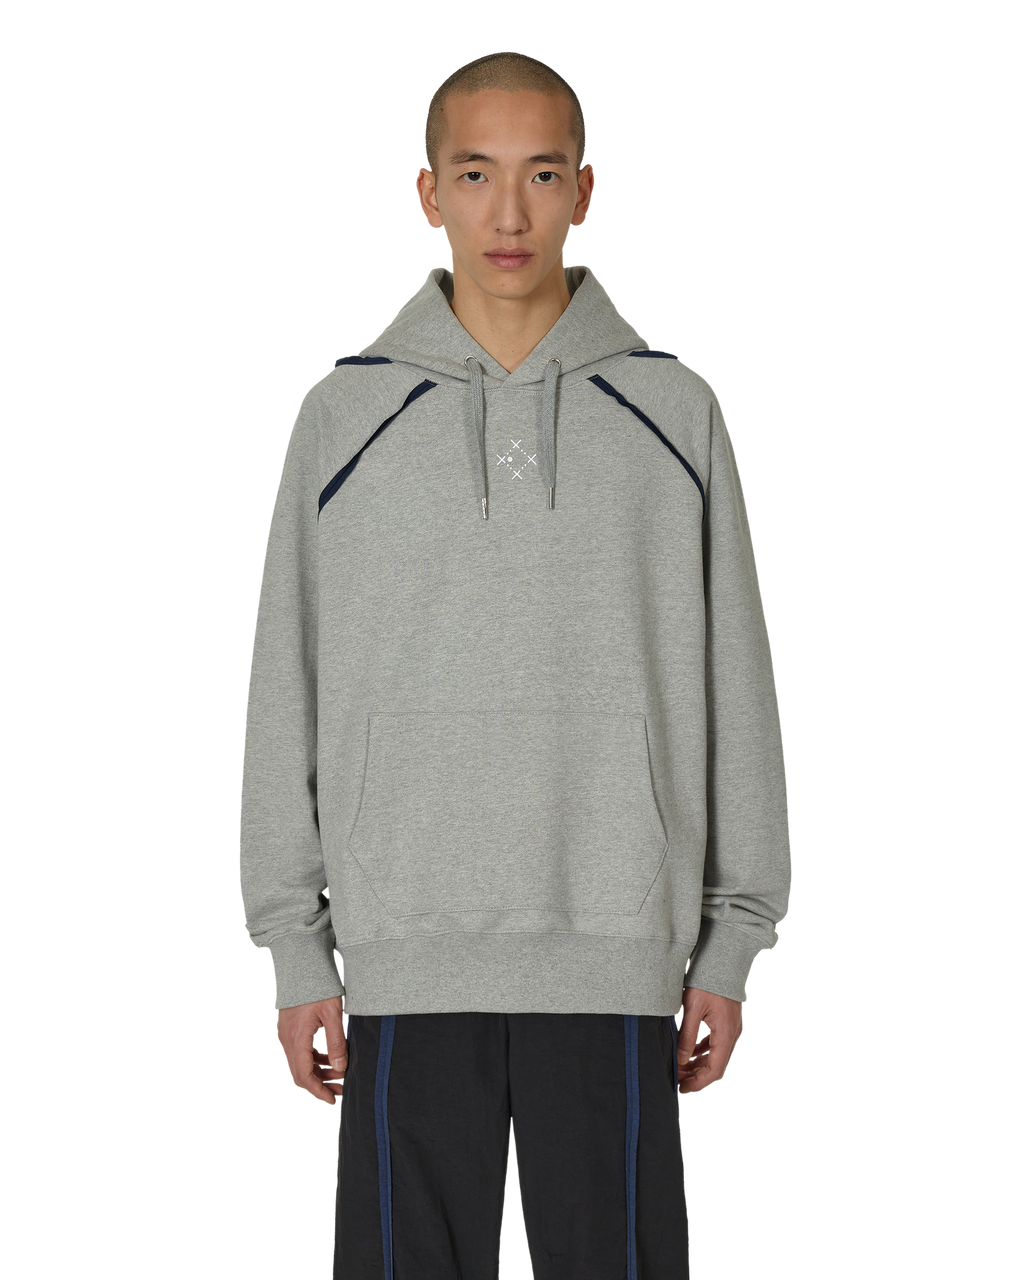 _J.L - A.L_ _J.L-A.L_ x Sound Sports Hoodie J297463-XL-Grey front